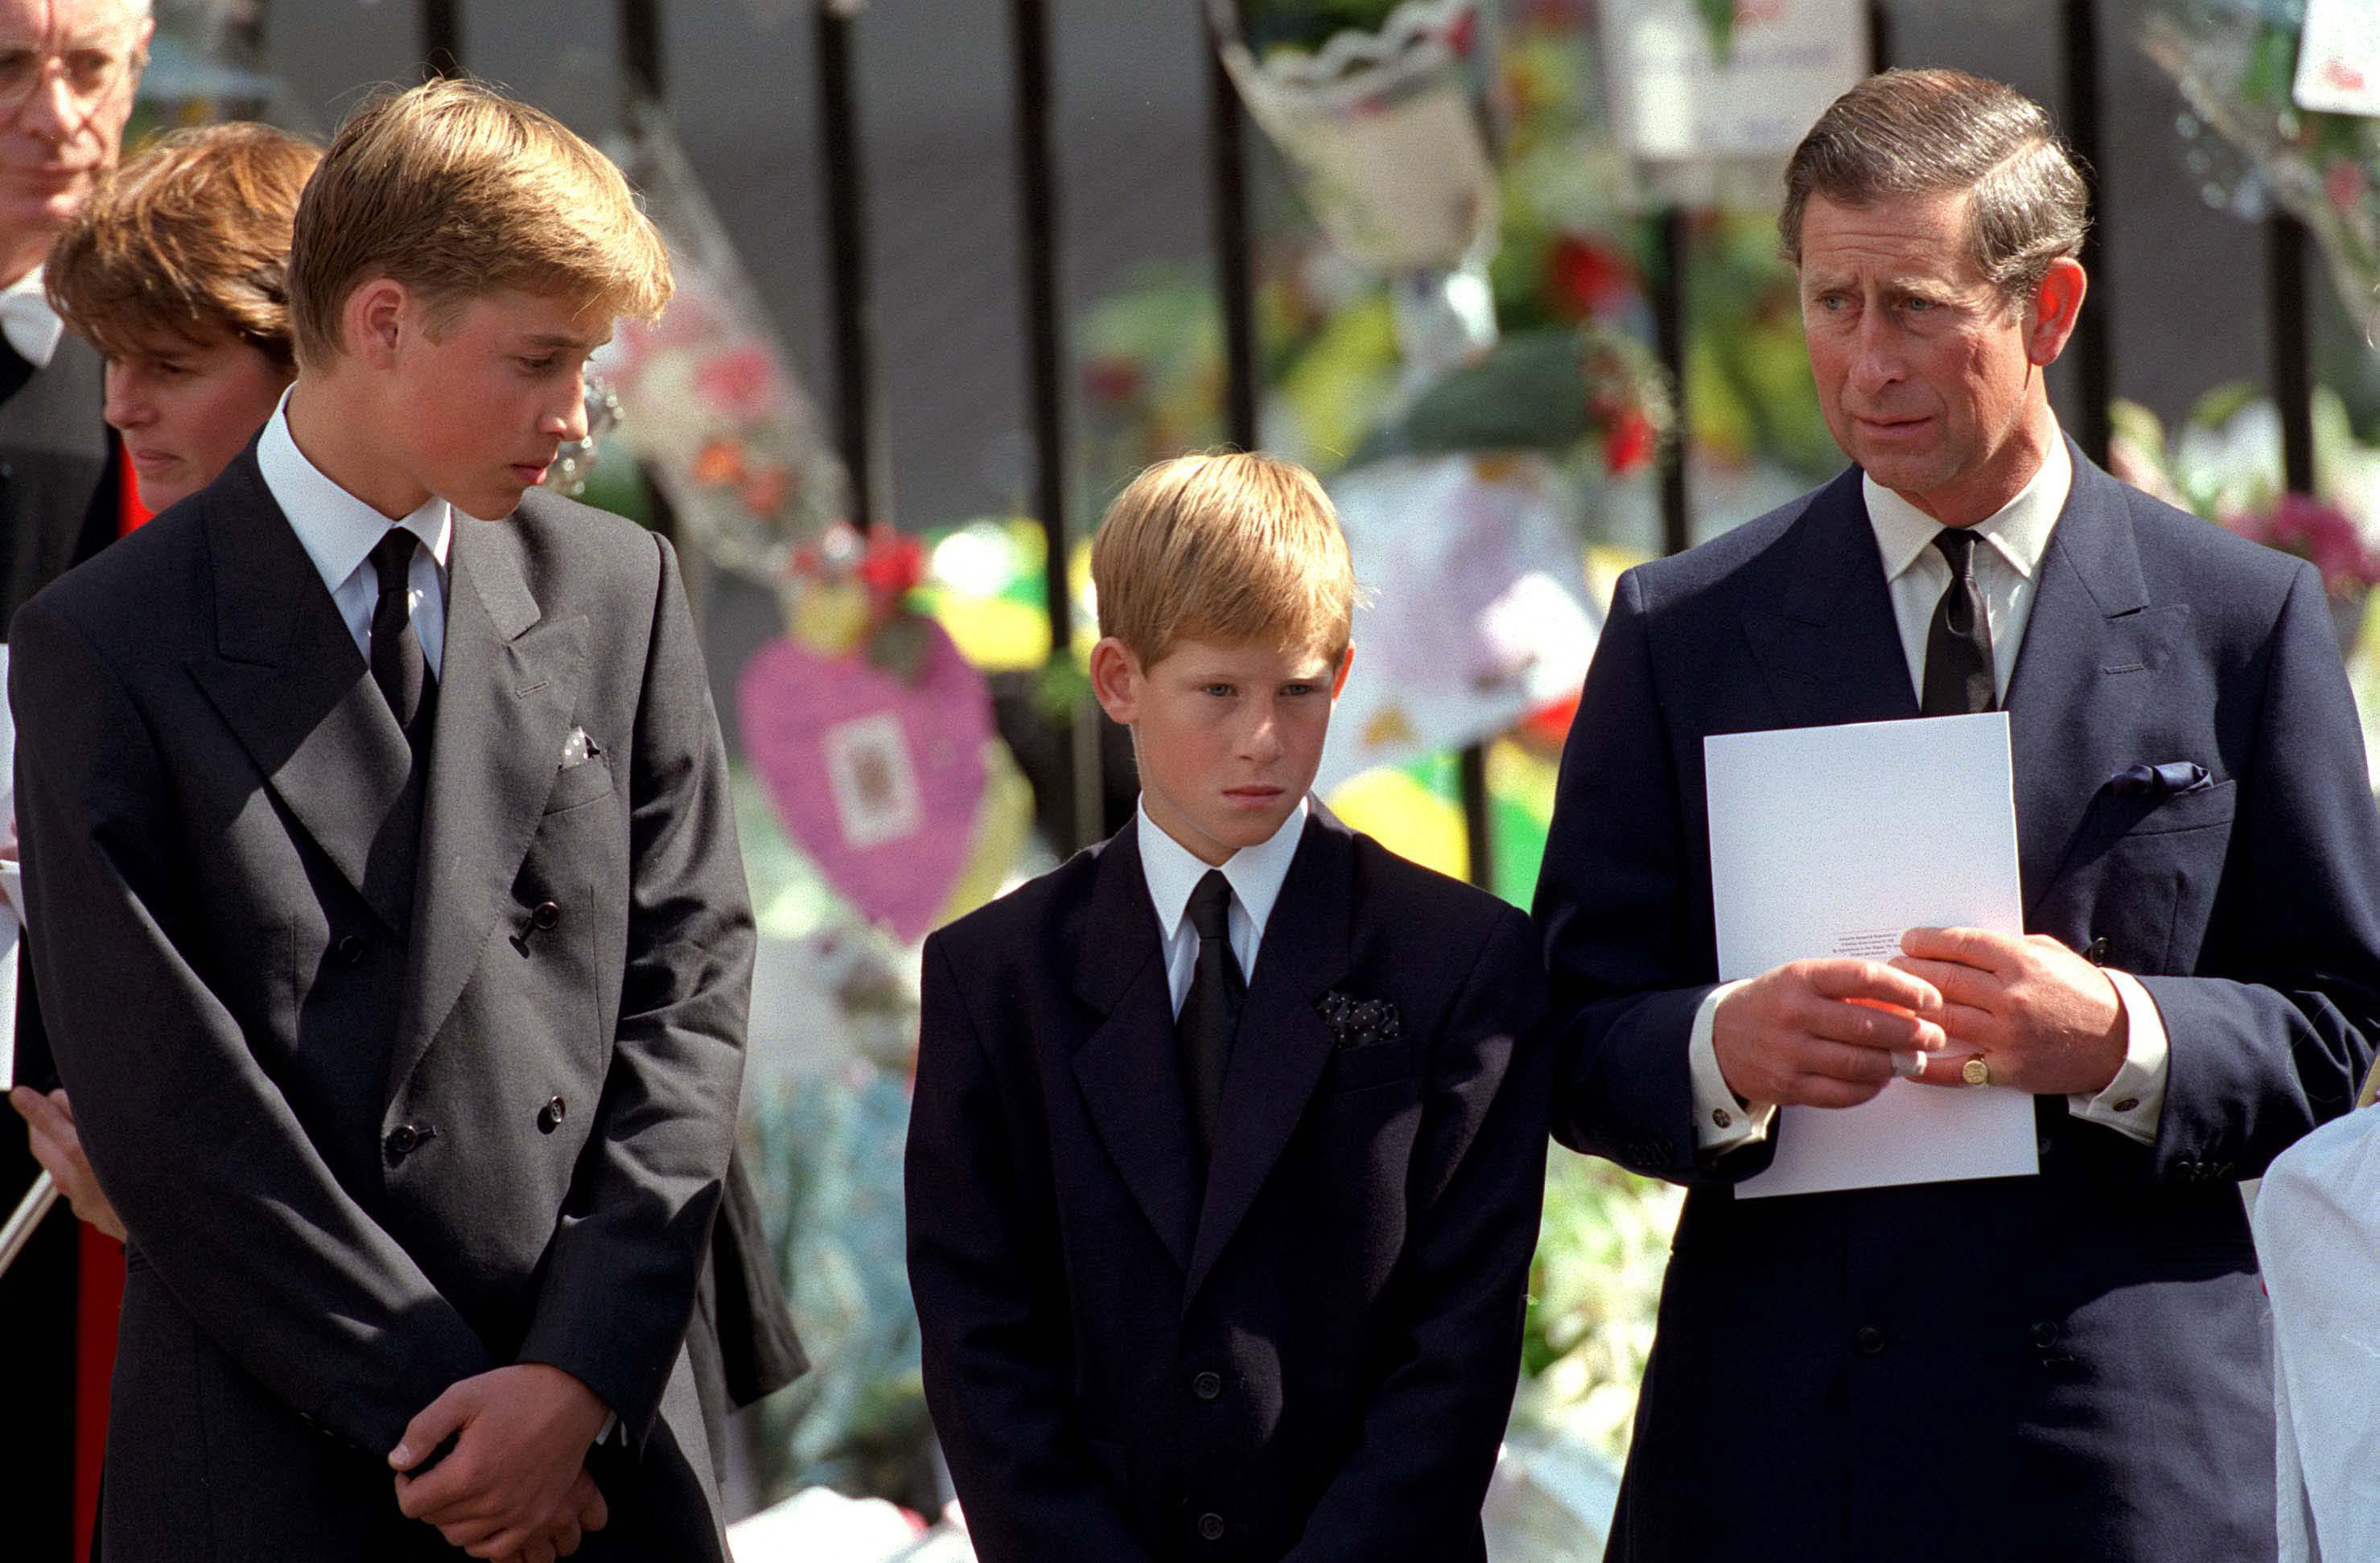 Prince William, Prince Harry and Prince Charles outside Westminster Abbey at the funeral of Princess Diana on on September 6, 1997 in London, England. | Source: Getty Images